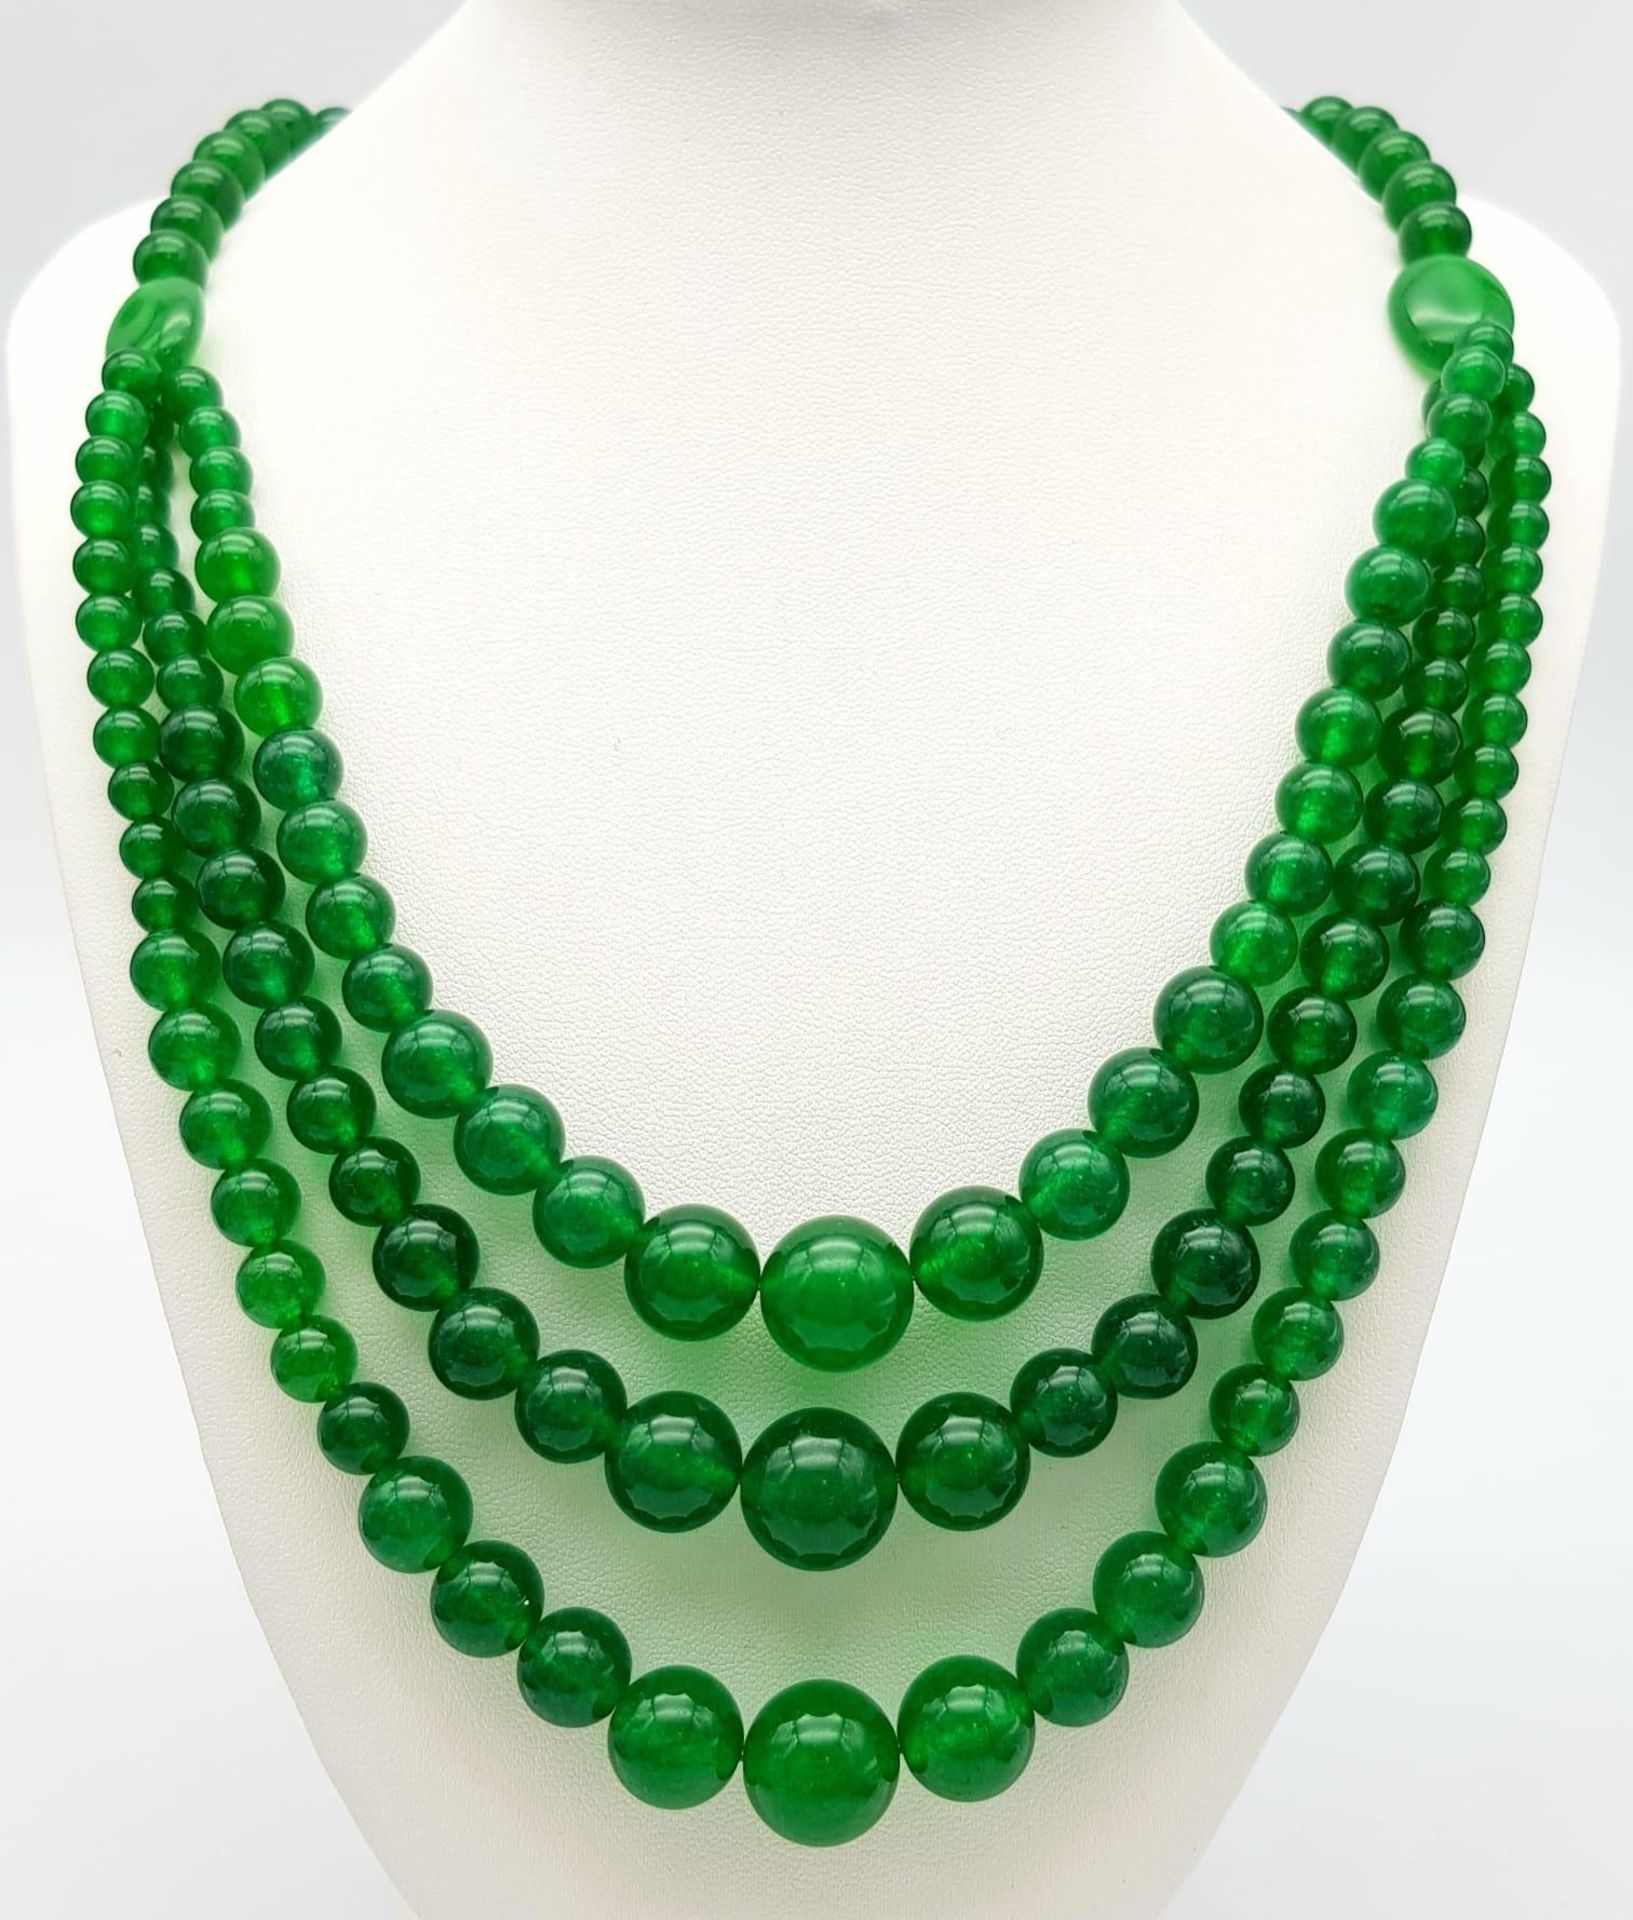 A Chinese Expansive Three Row Green Jade Necklace. A green jade bead necklace gives way to a three